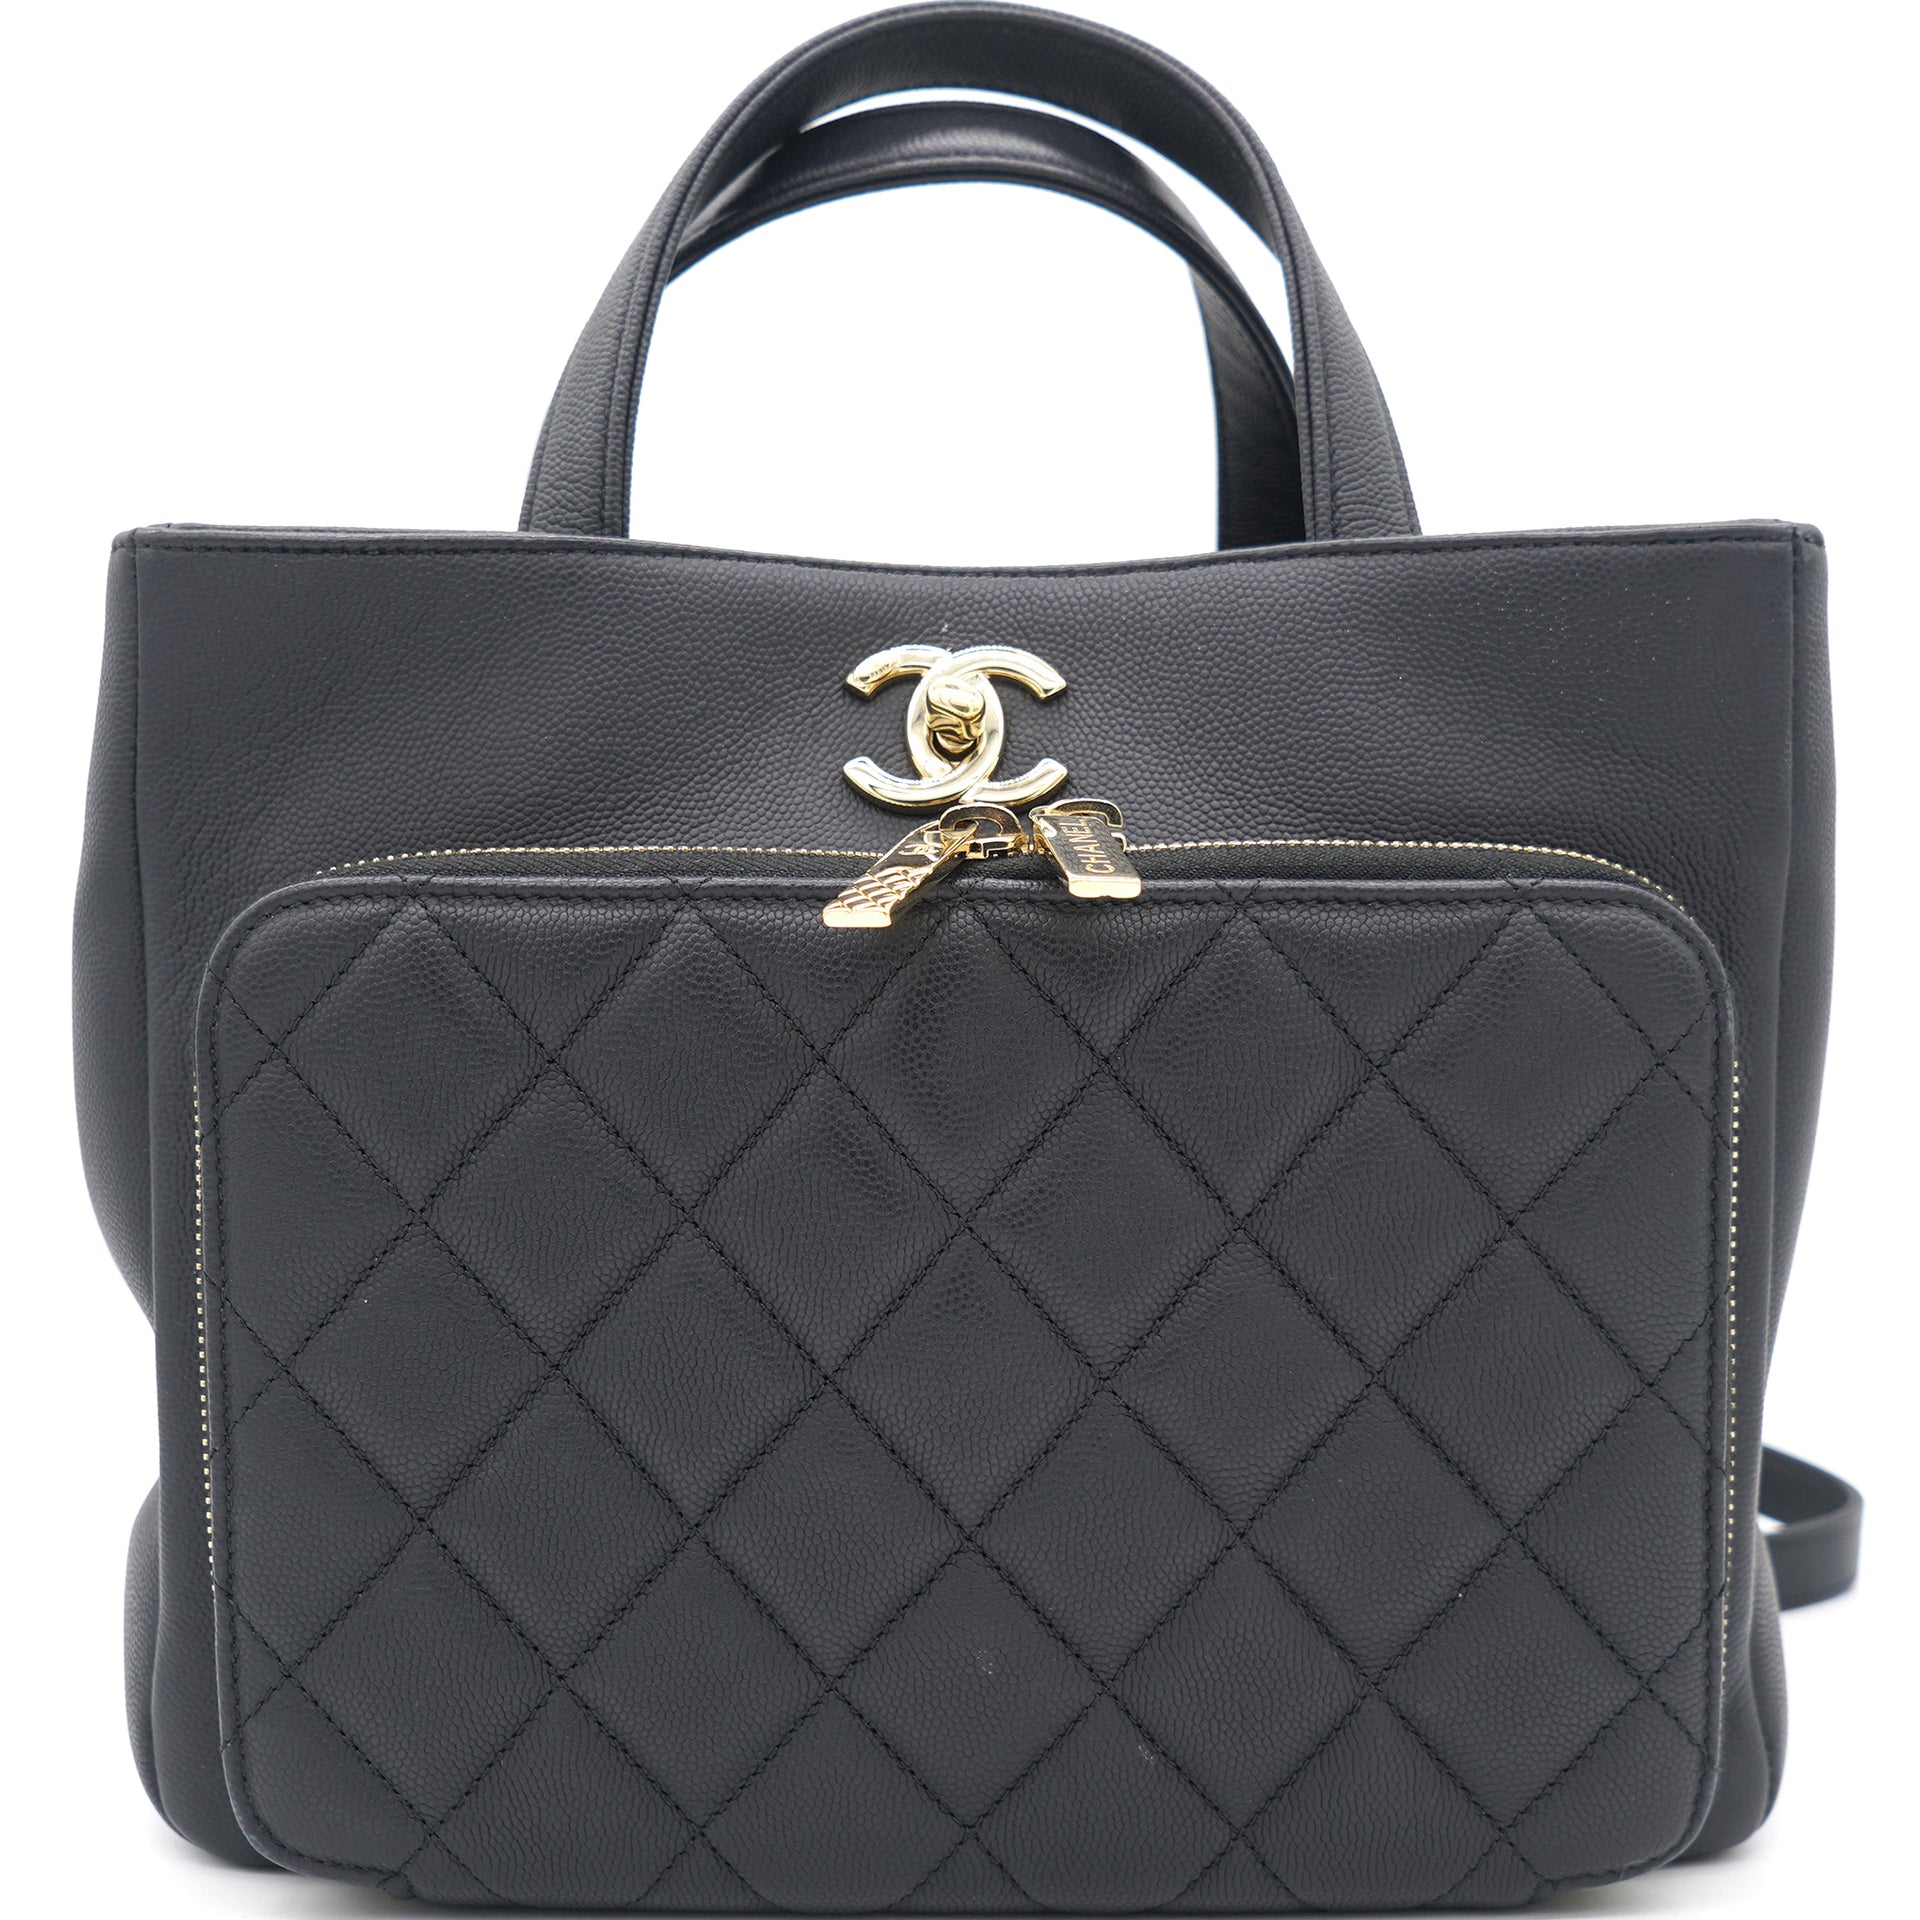 Chanel Black Quilted Caviar Leather Medium Business Affinity Tote